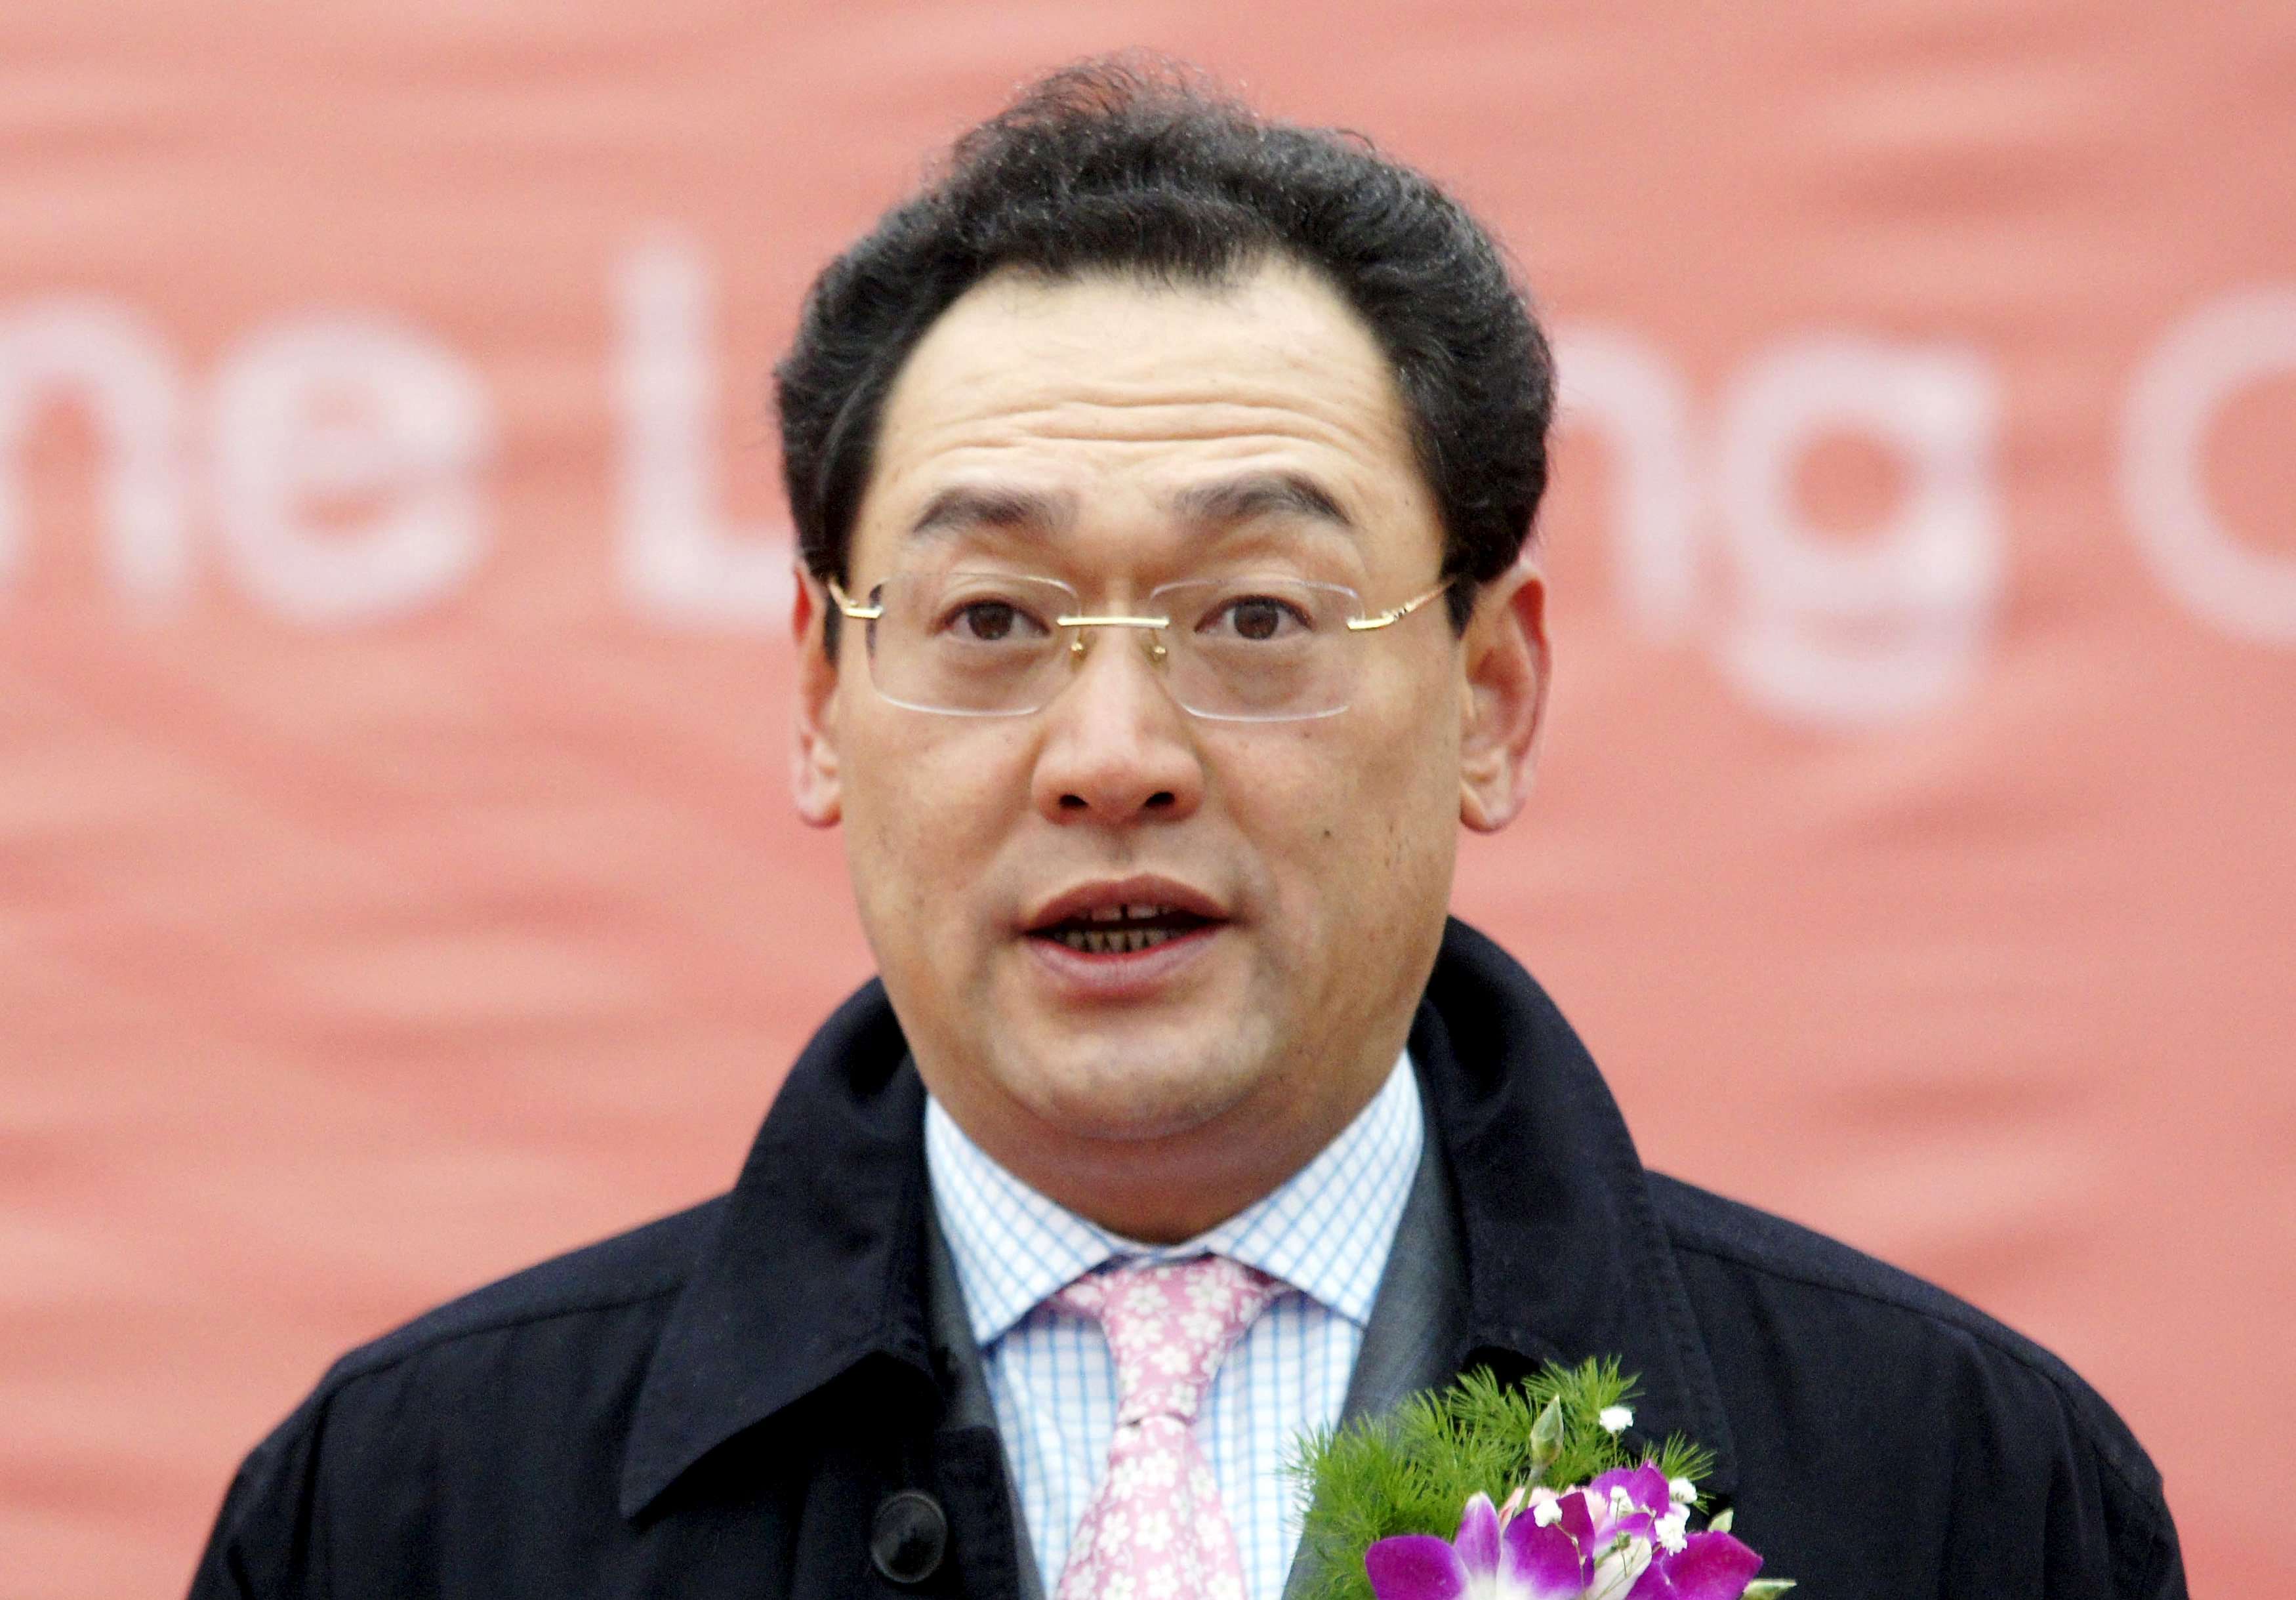 Song Lin, the Former Chairman of China Resources, has been indicted on corruption charges in Guangzhou. Photo: Reuters